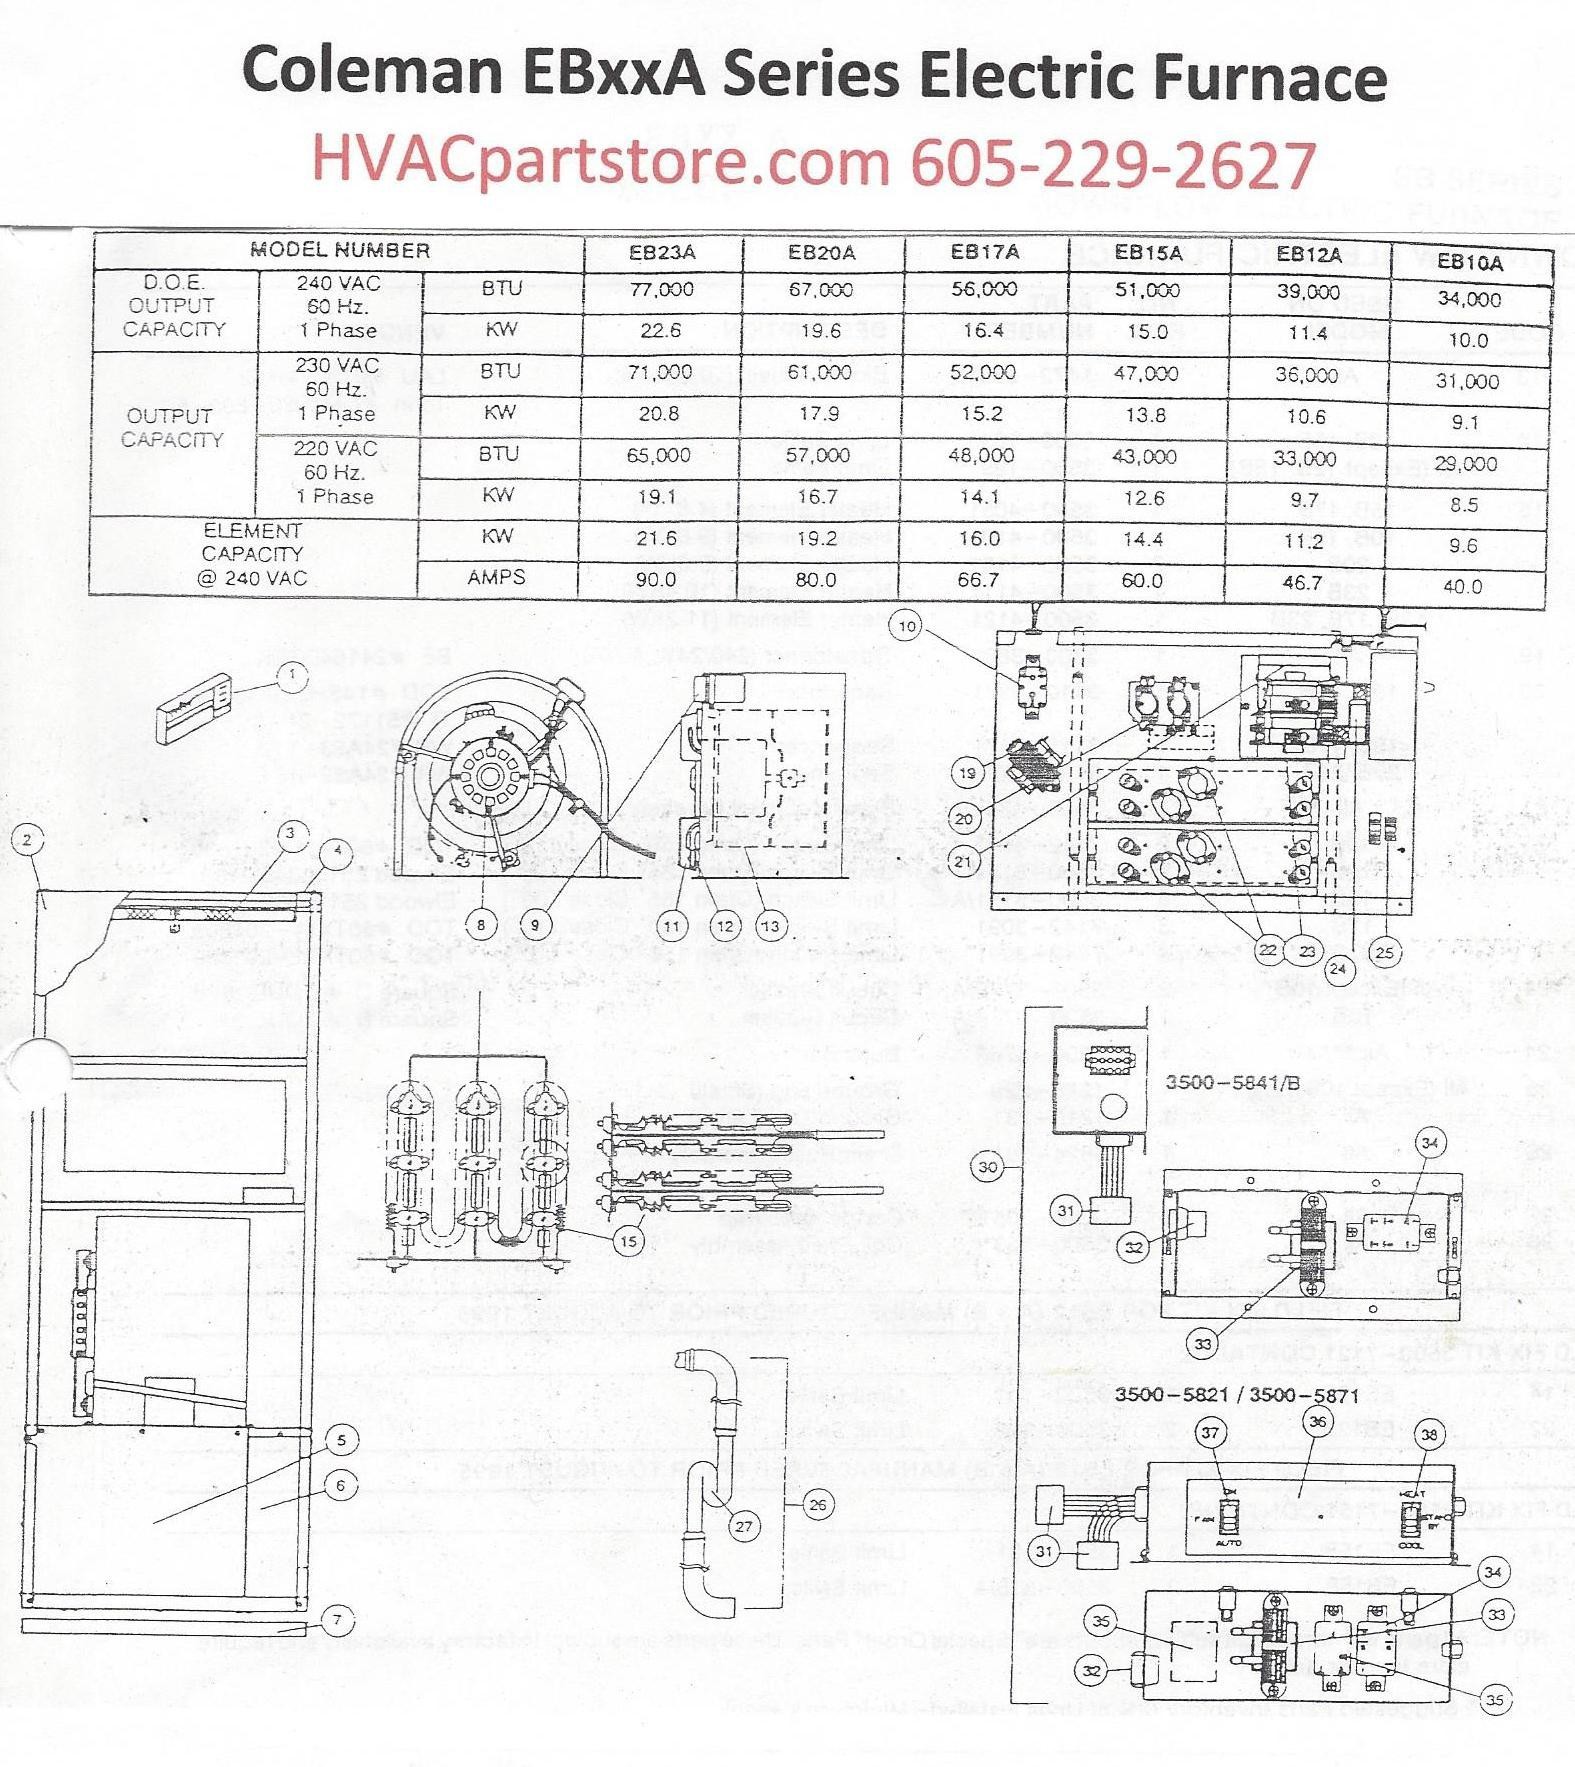 Wiring Diagram For Rv Furnace Refrence Air Conditioner Thermostat Wiring Diagram Fresh Rv Furnace